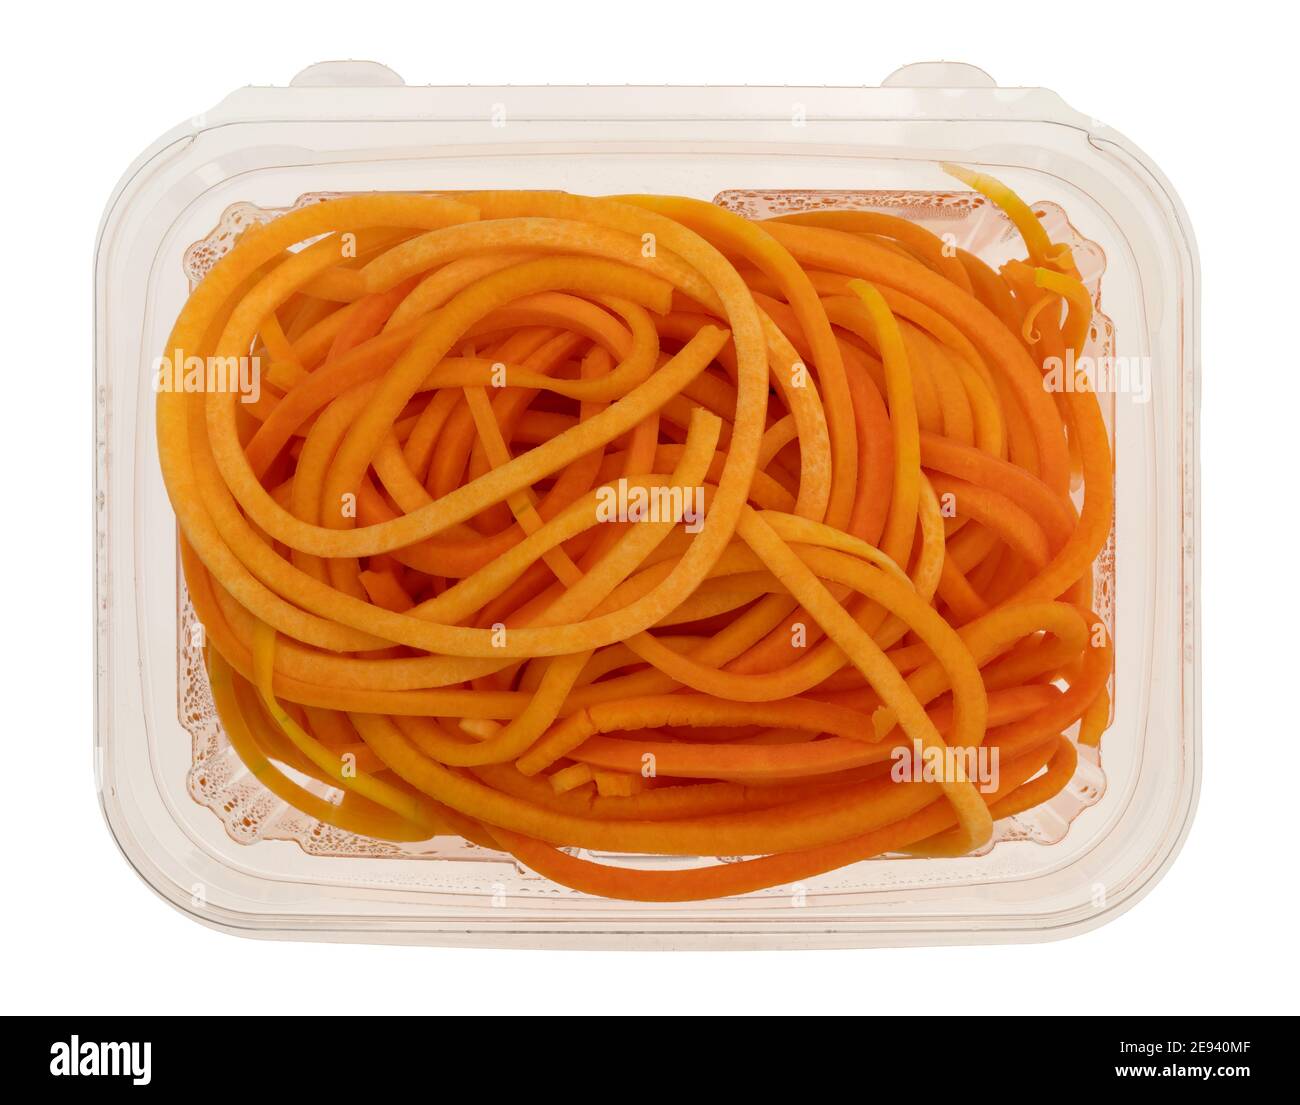 Top view of a plastic container of butternut squash noodles isolated on a white background. Stock Photo